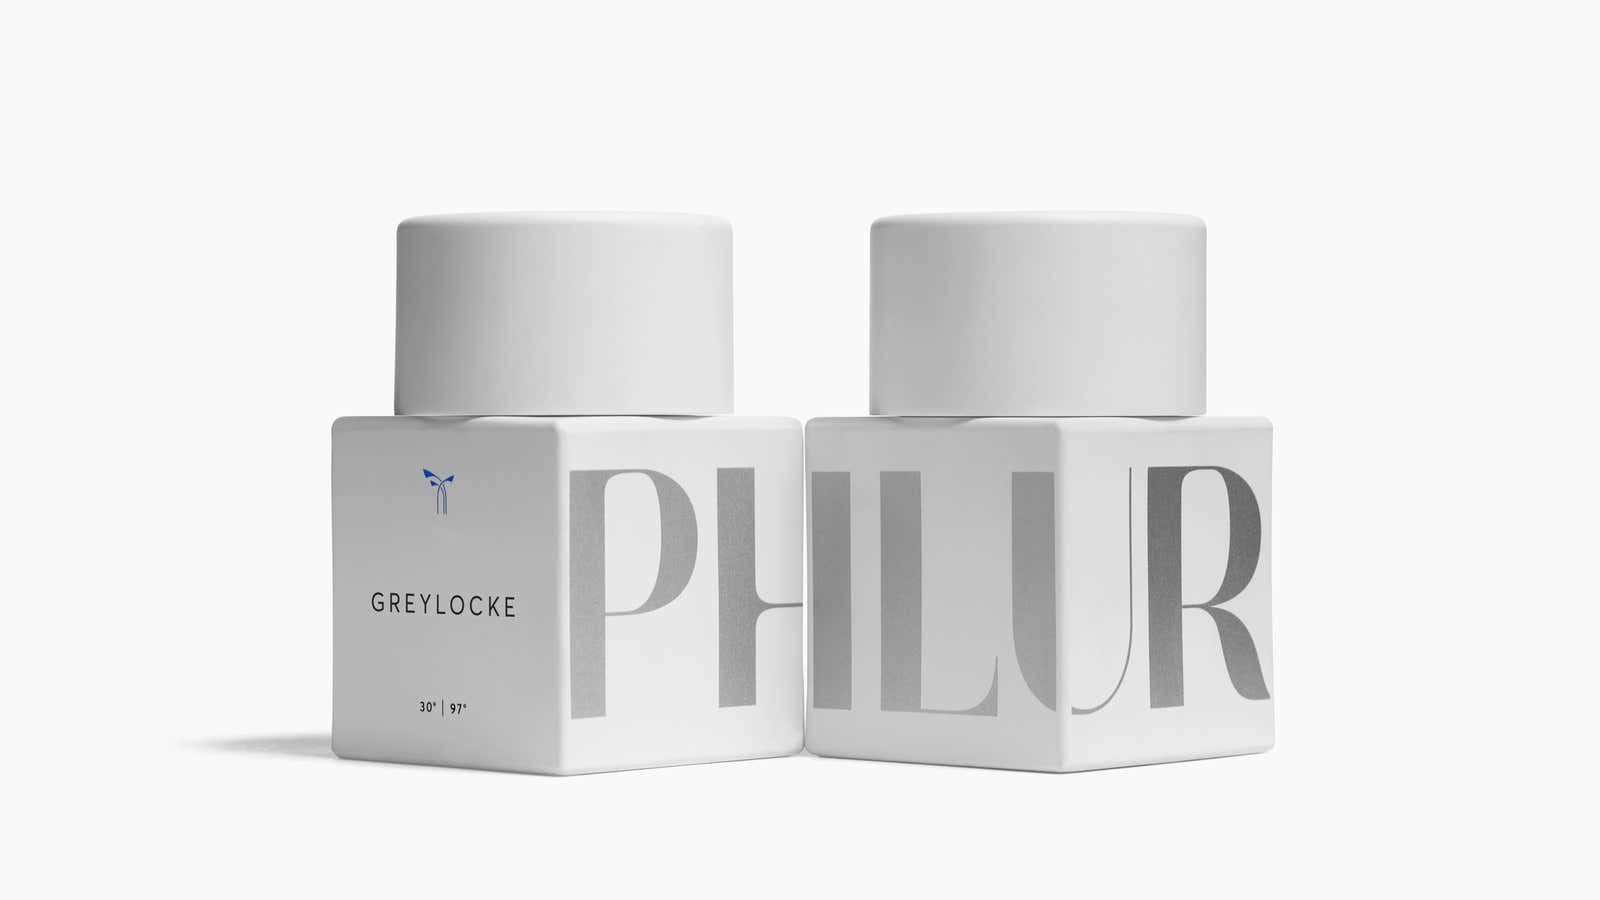 The name Phlur is a play on the French “fleur” and the pH level of skin.